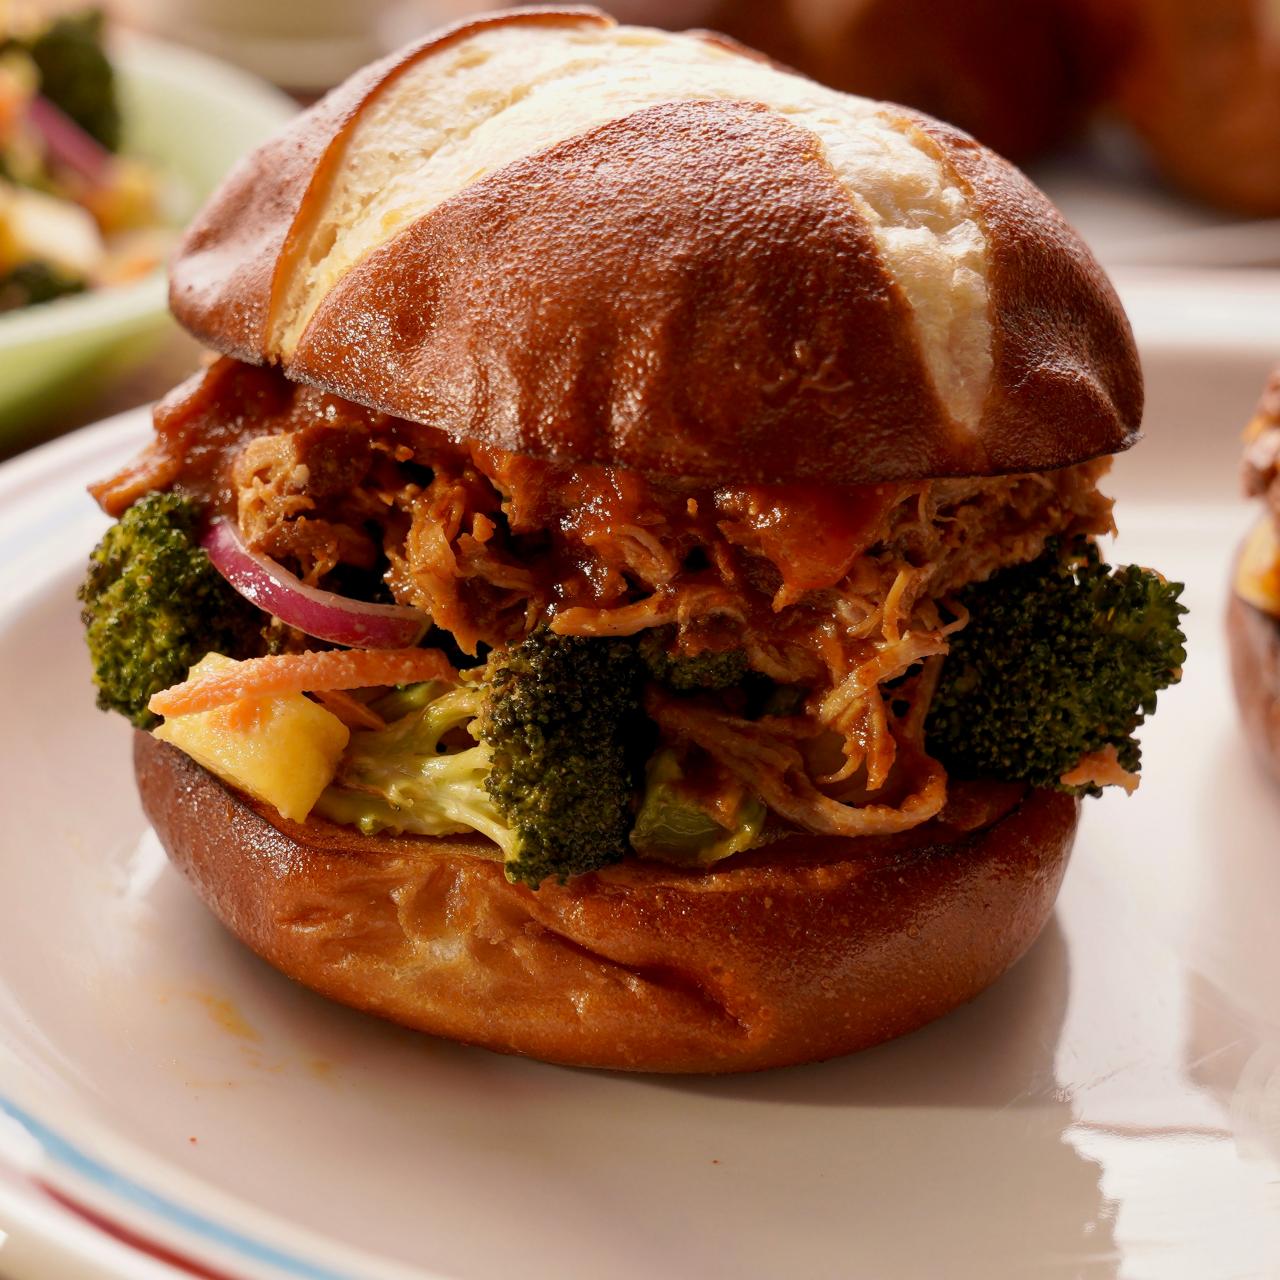 https://food.fnr.sndimg.com/content/dam/images/food/fullset/2022/12/21/MW1203-molly-yeh-pulled-pork-sandwiches-with-charred-broccoli-salad_s4x3.jpg.rend.hgtvcom.1280.1280.suffix/1671640481656.jpeg